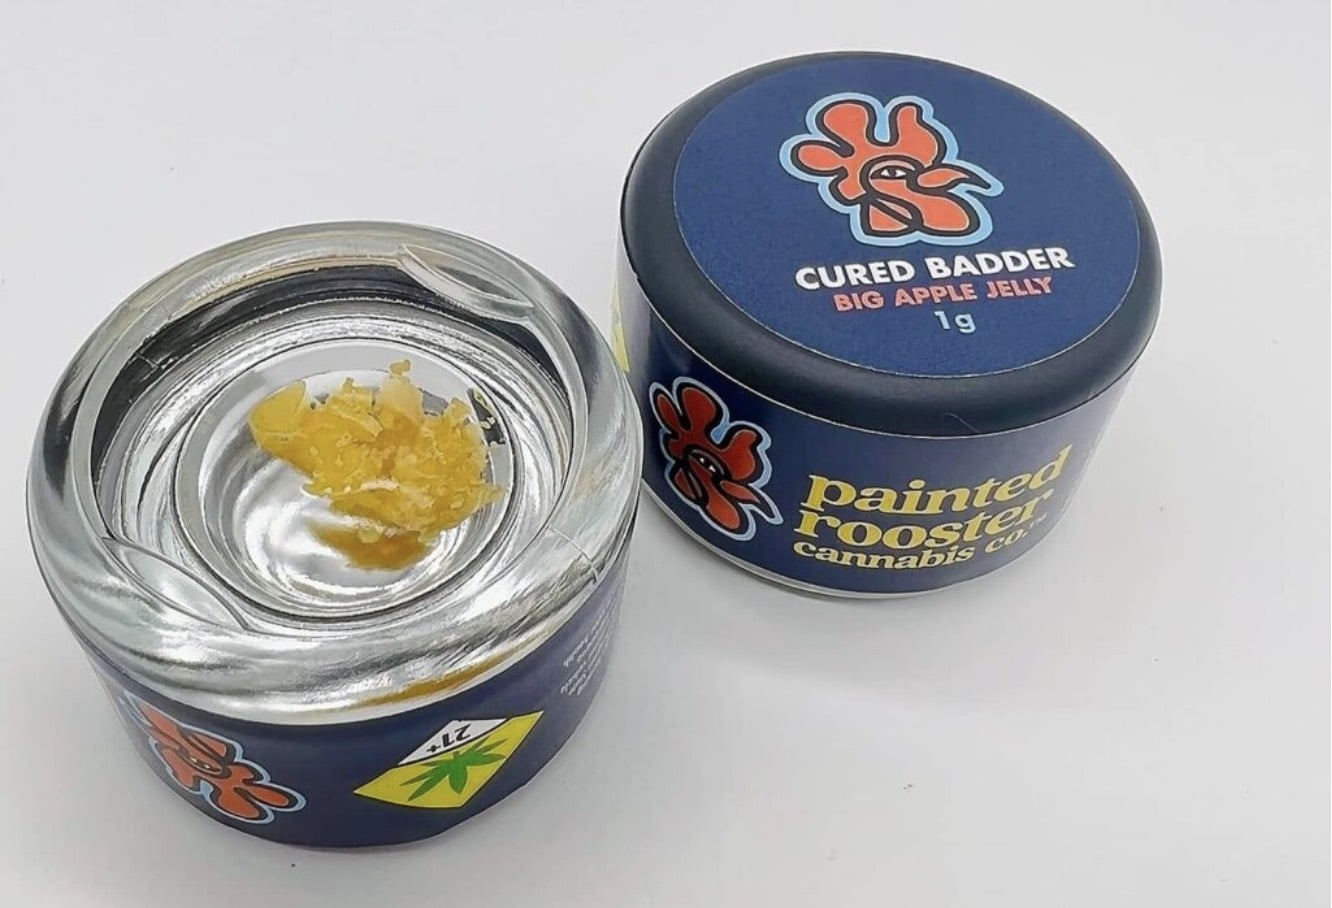 Big Apple Jelly Badder Cannabis Concentrate Dab from Painted Rooster